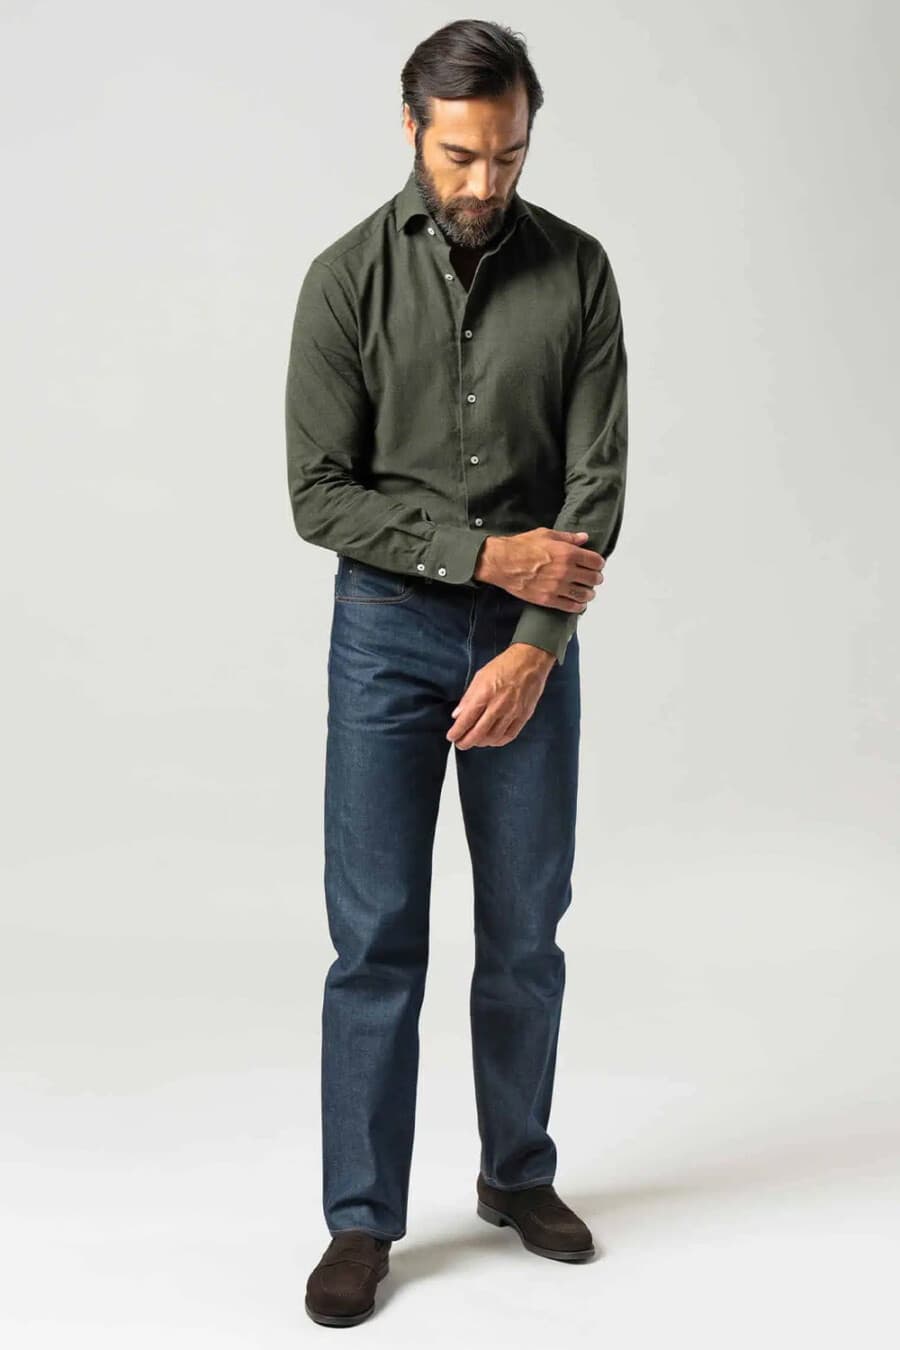 Men's dark raw denim jeans, tucked in green dress shirt and brown suede shoes outfit